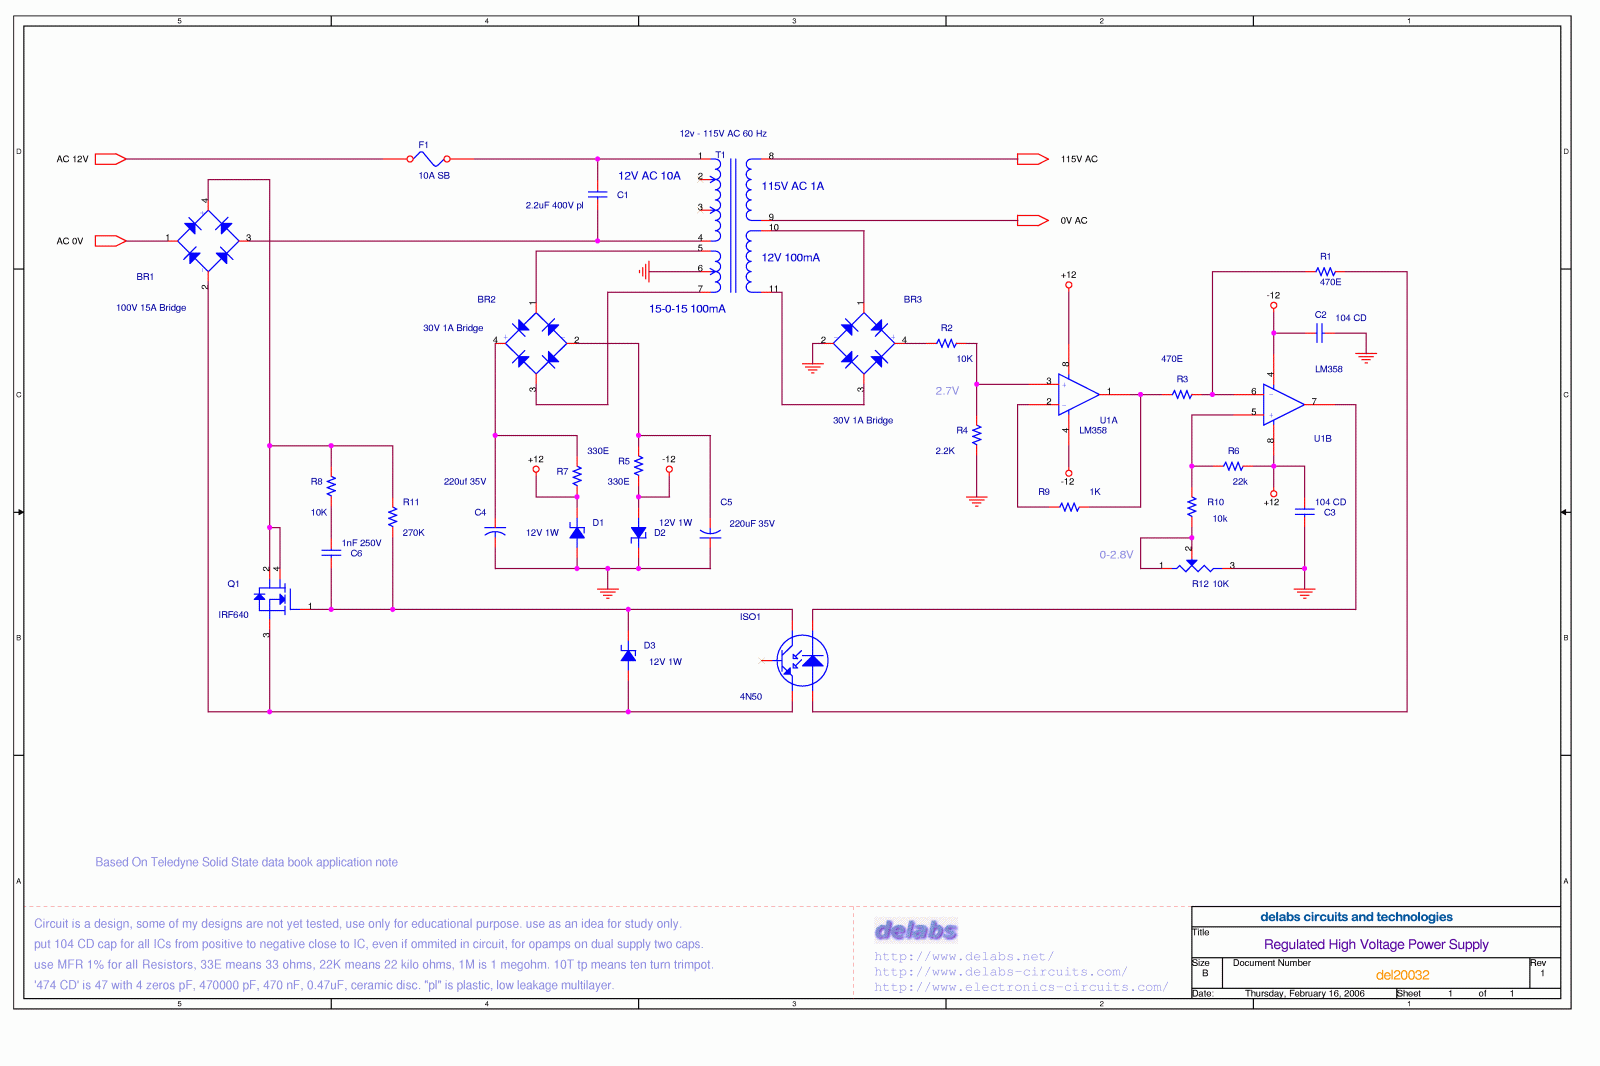 Regulated High Voltage Power Supply - del20032